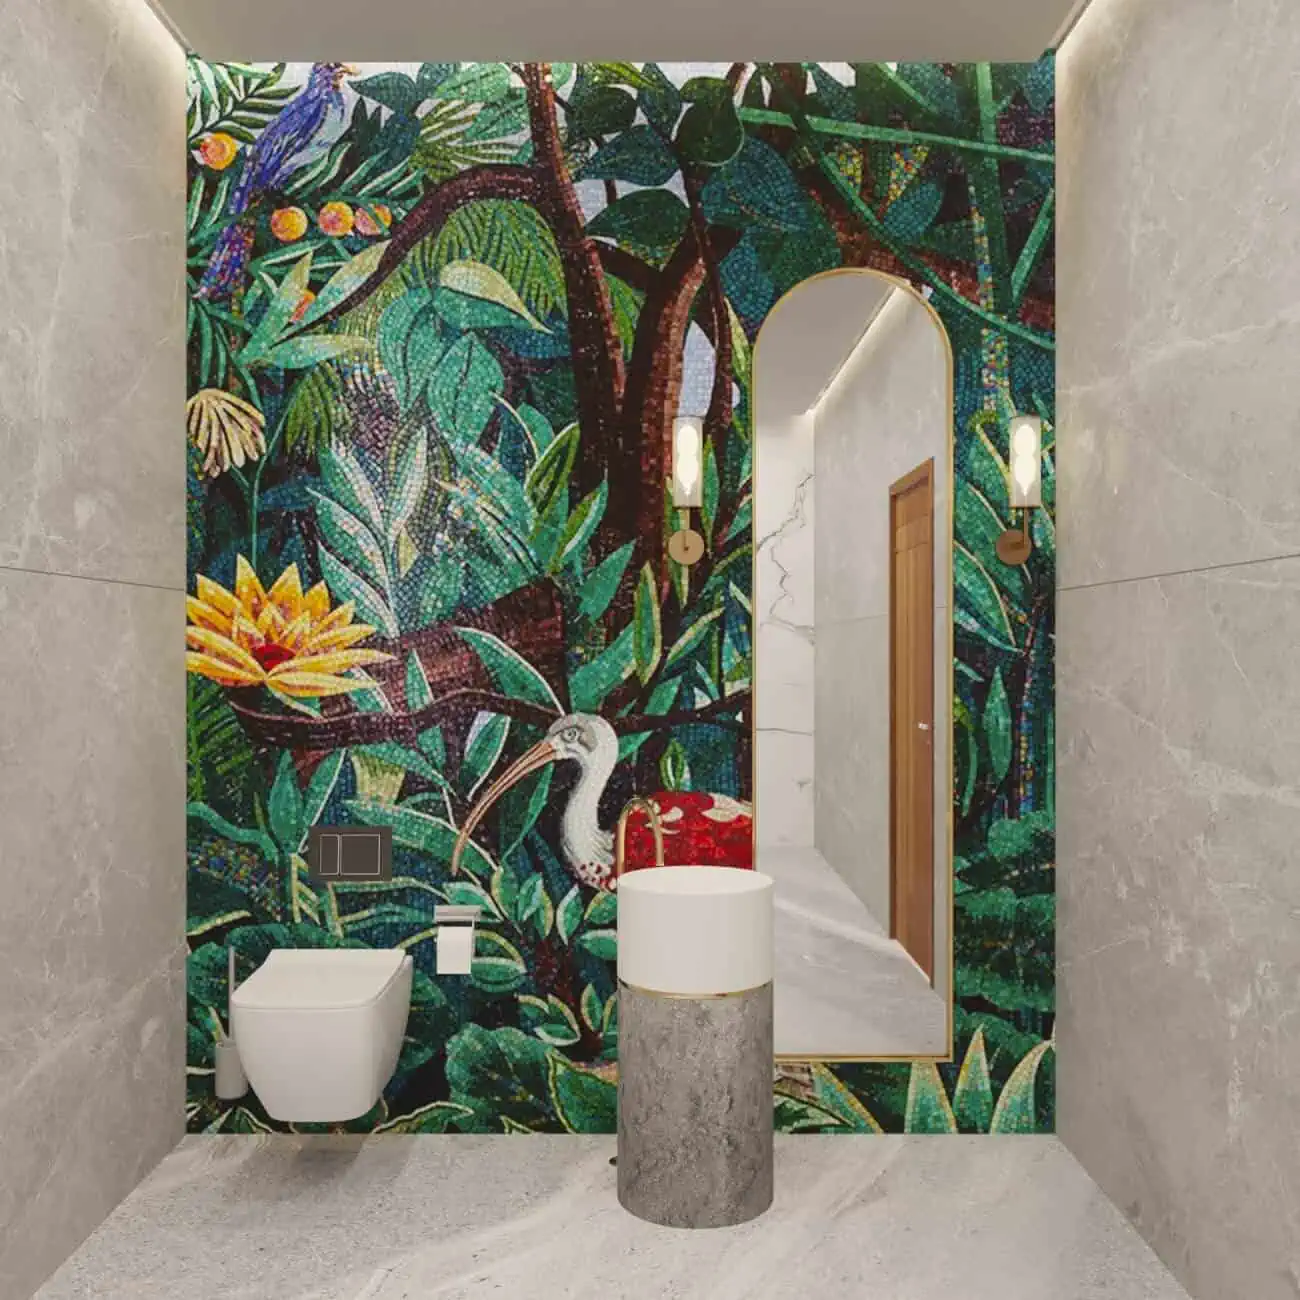 Jungle theme bathroom wall mosaic artwork featuring flower mosaic. tropical plants, leaves and exotic birds such as ibis